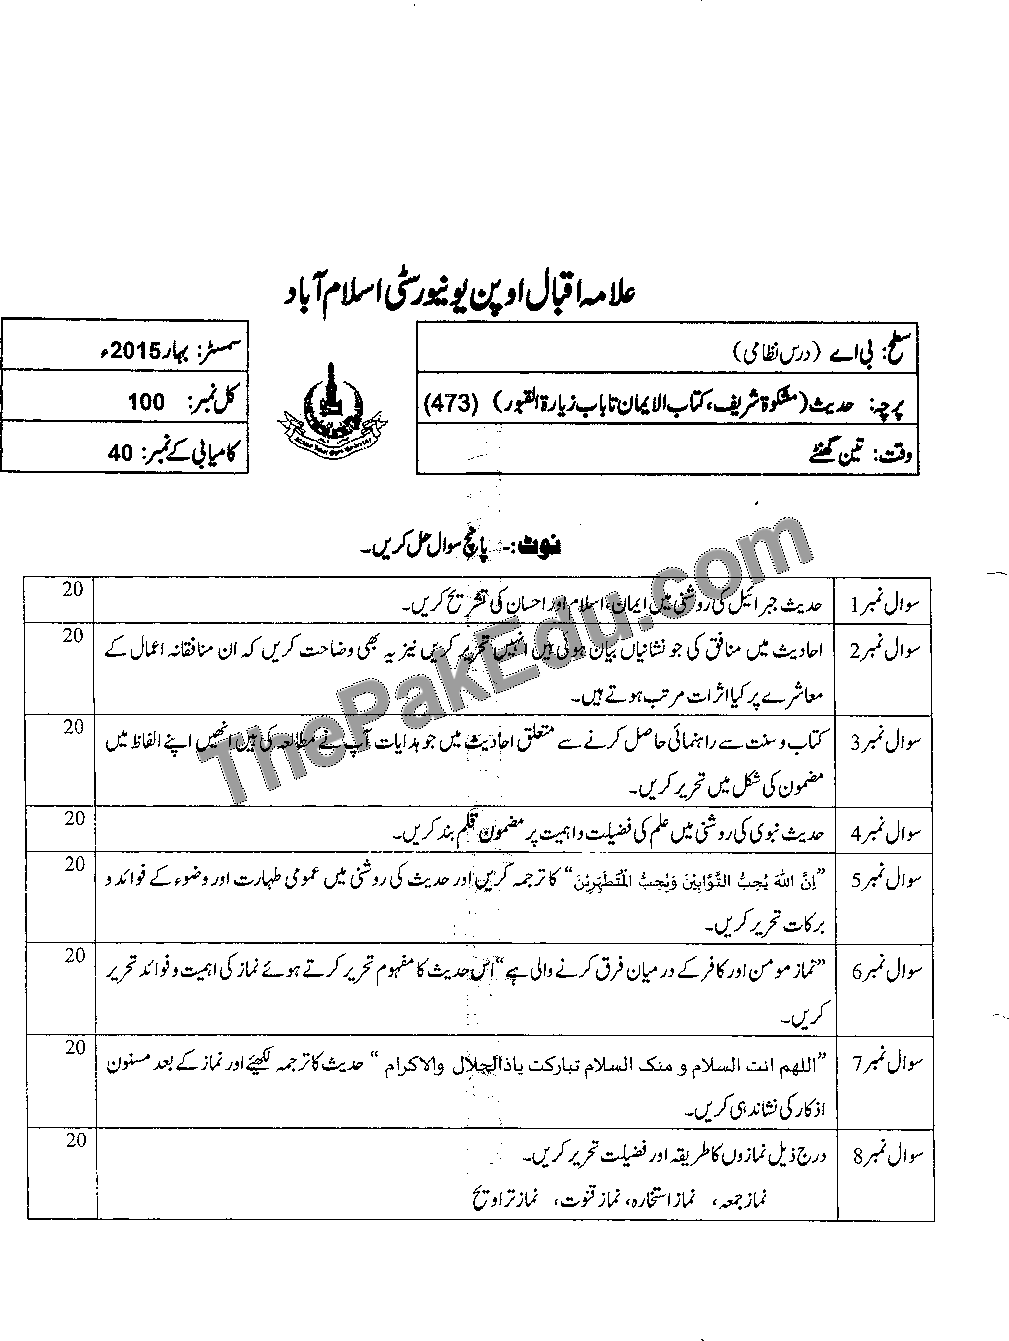 Hadith code no 473 Spring 2015, AIOU Old Papers